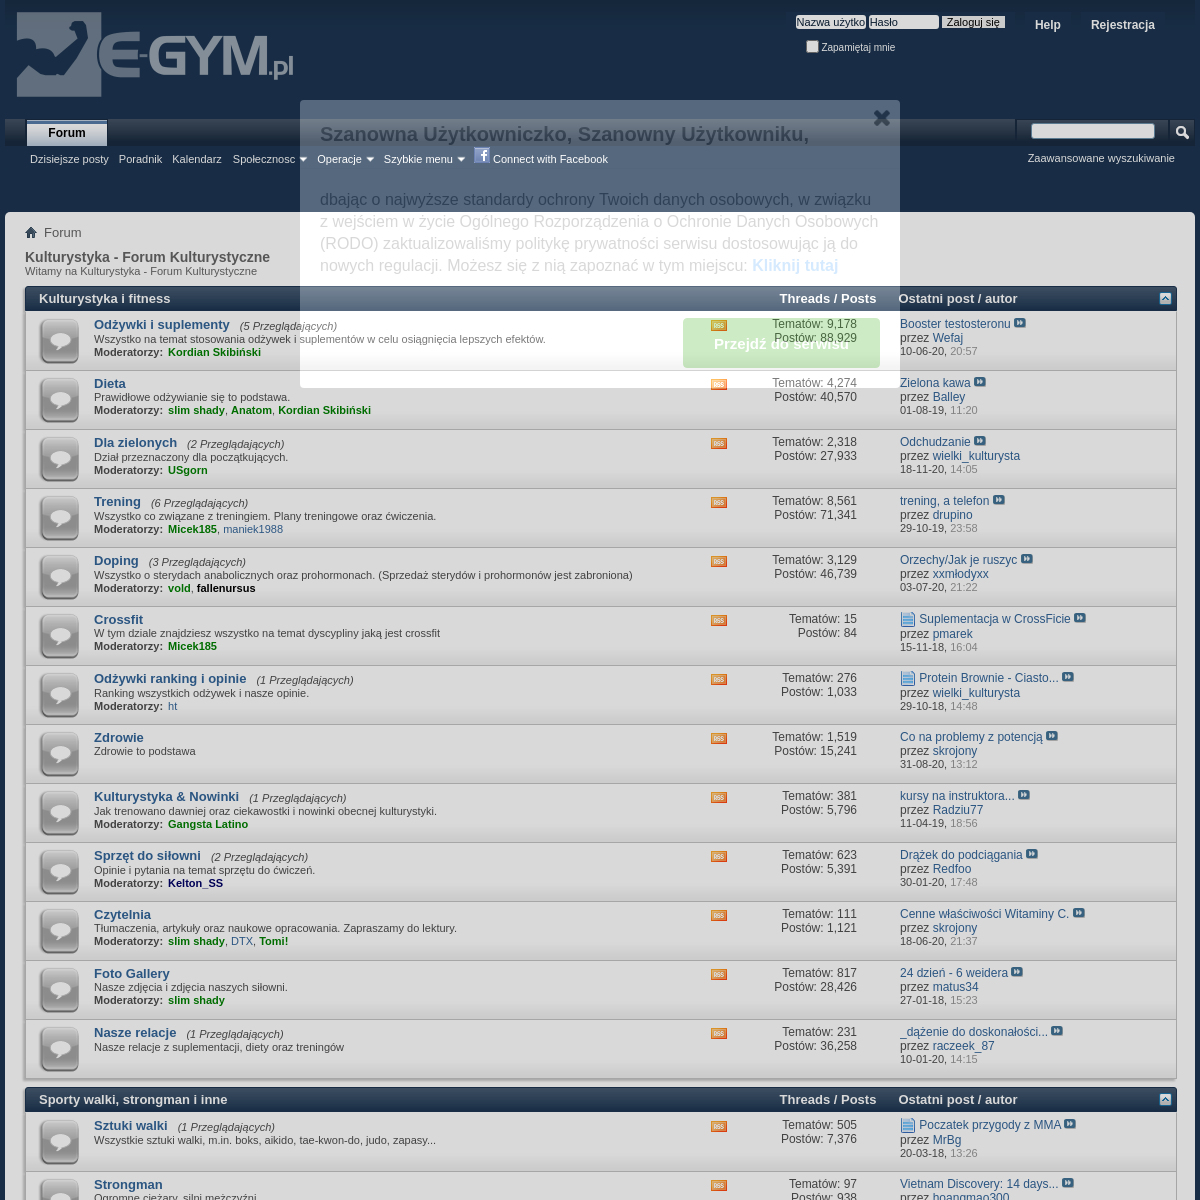 A complete backup of e-gym.pl